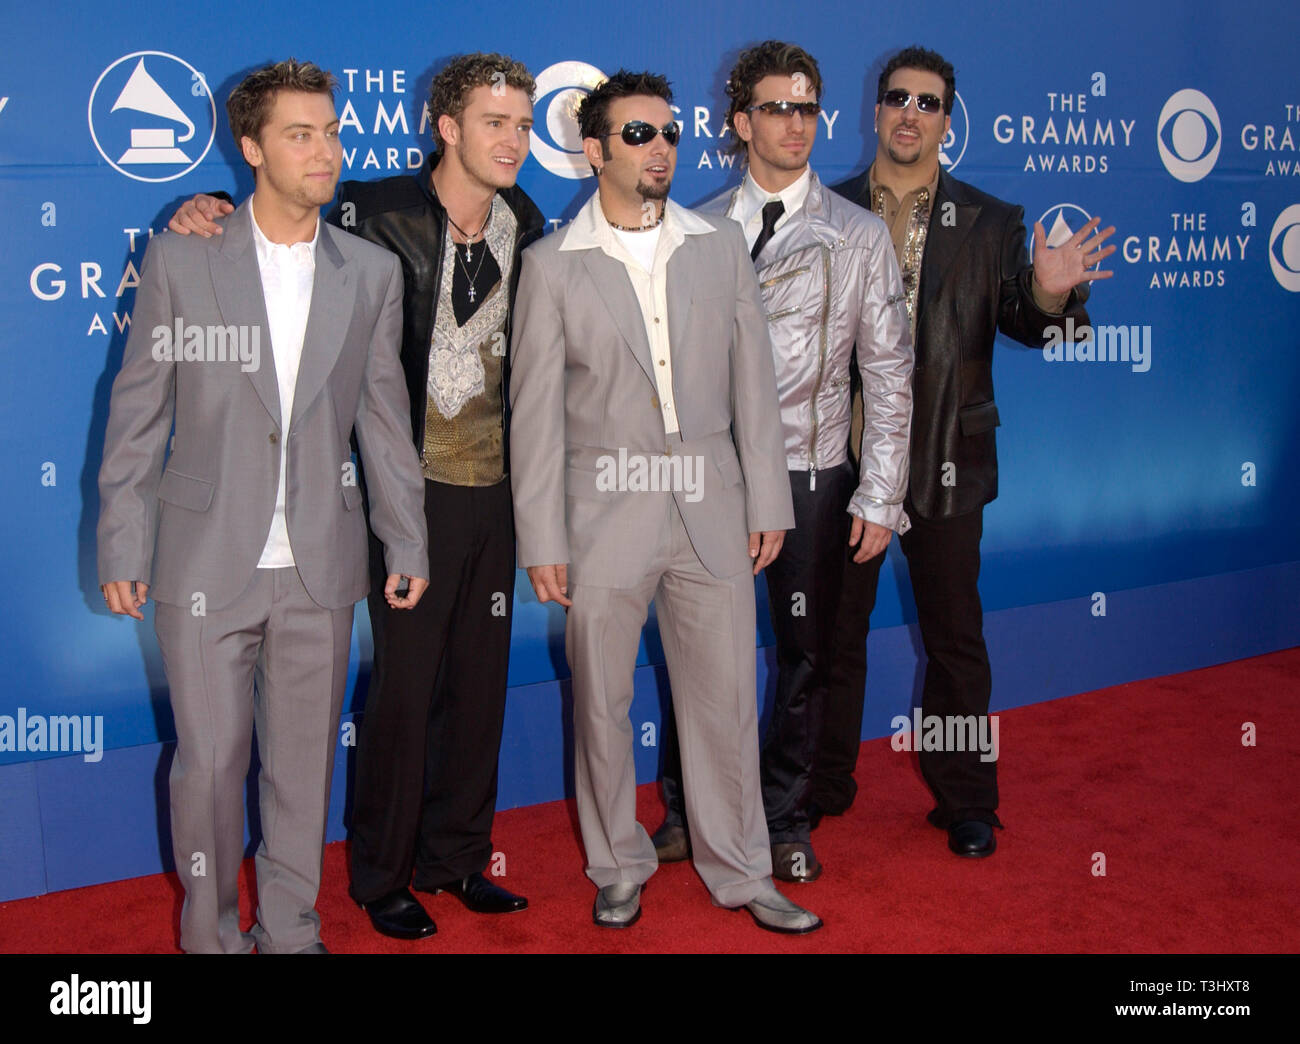 LOS ANGELES, CA. February 27, 2002: Pop group *NSYNC at the 2002 Grammy Awards in Los Angeles. Stock Photo